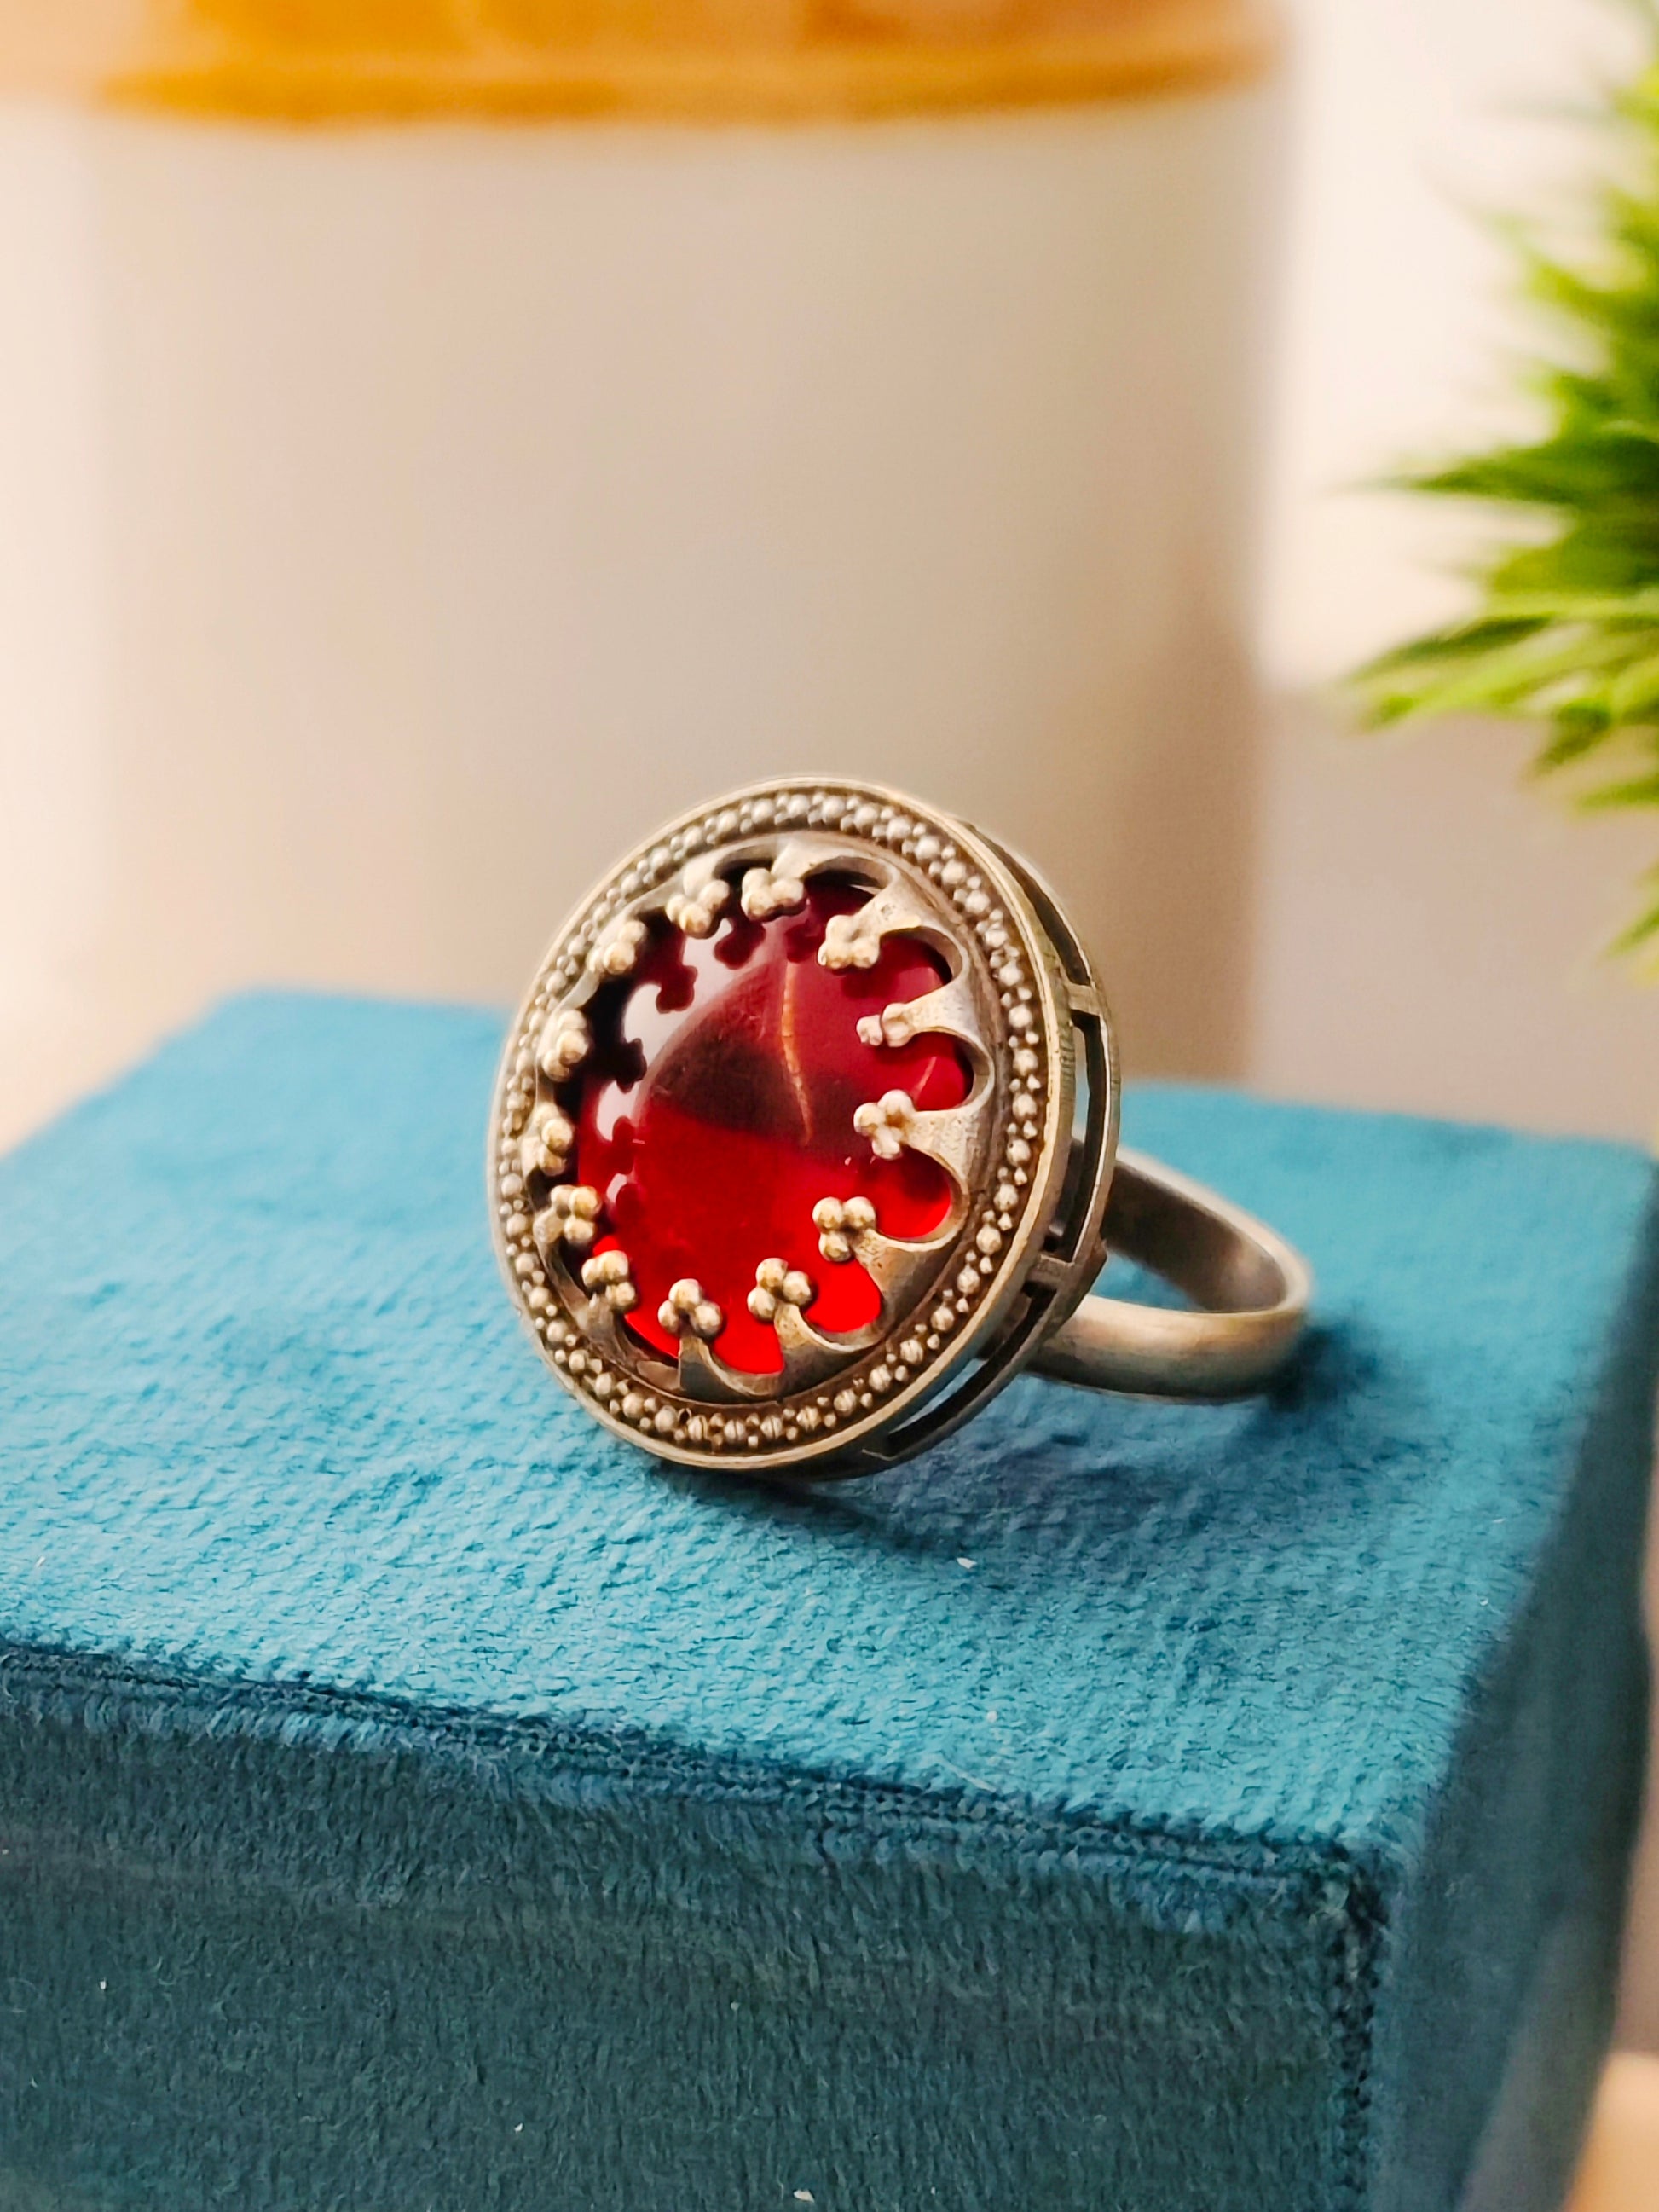 Aganya Multi Color Adjustable Rings with Antique Finish and Big Stone | Festive Occasions | for Traditional Look | for Office Indian Look- Red - Mrigaya India